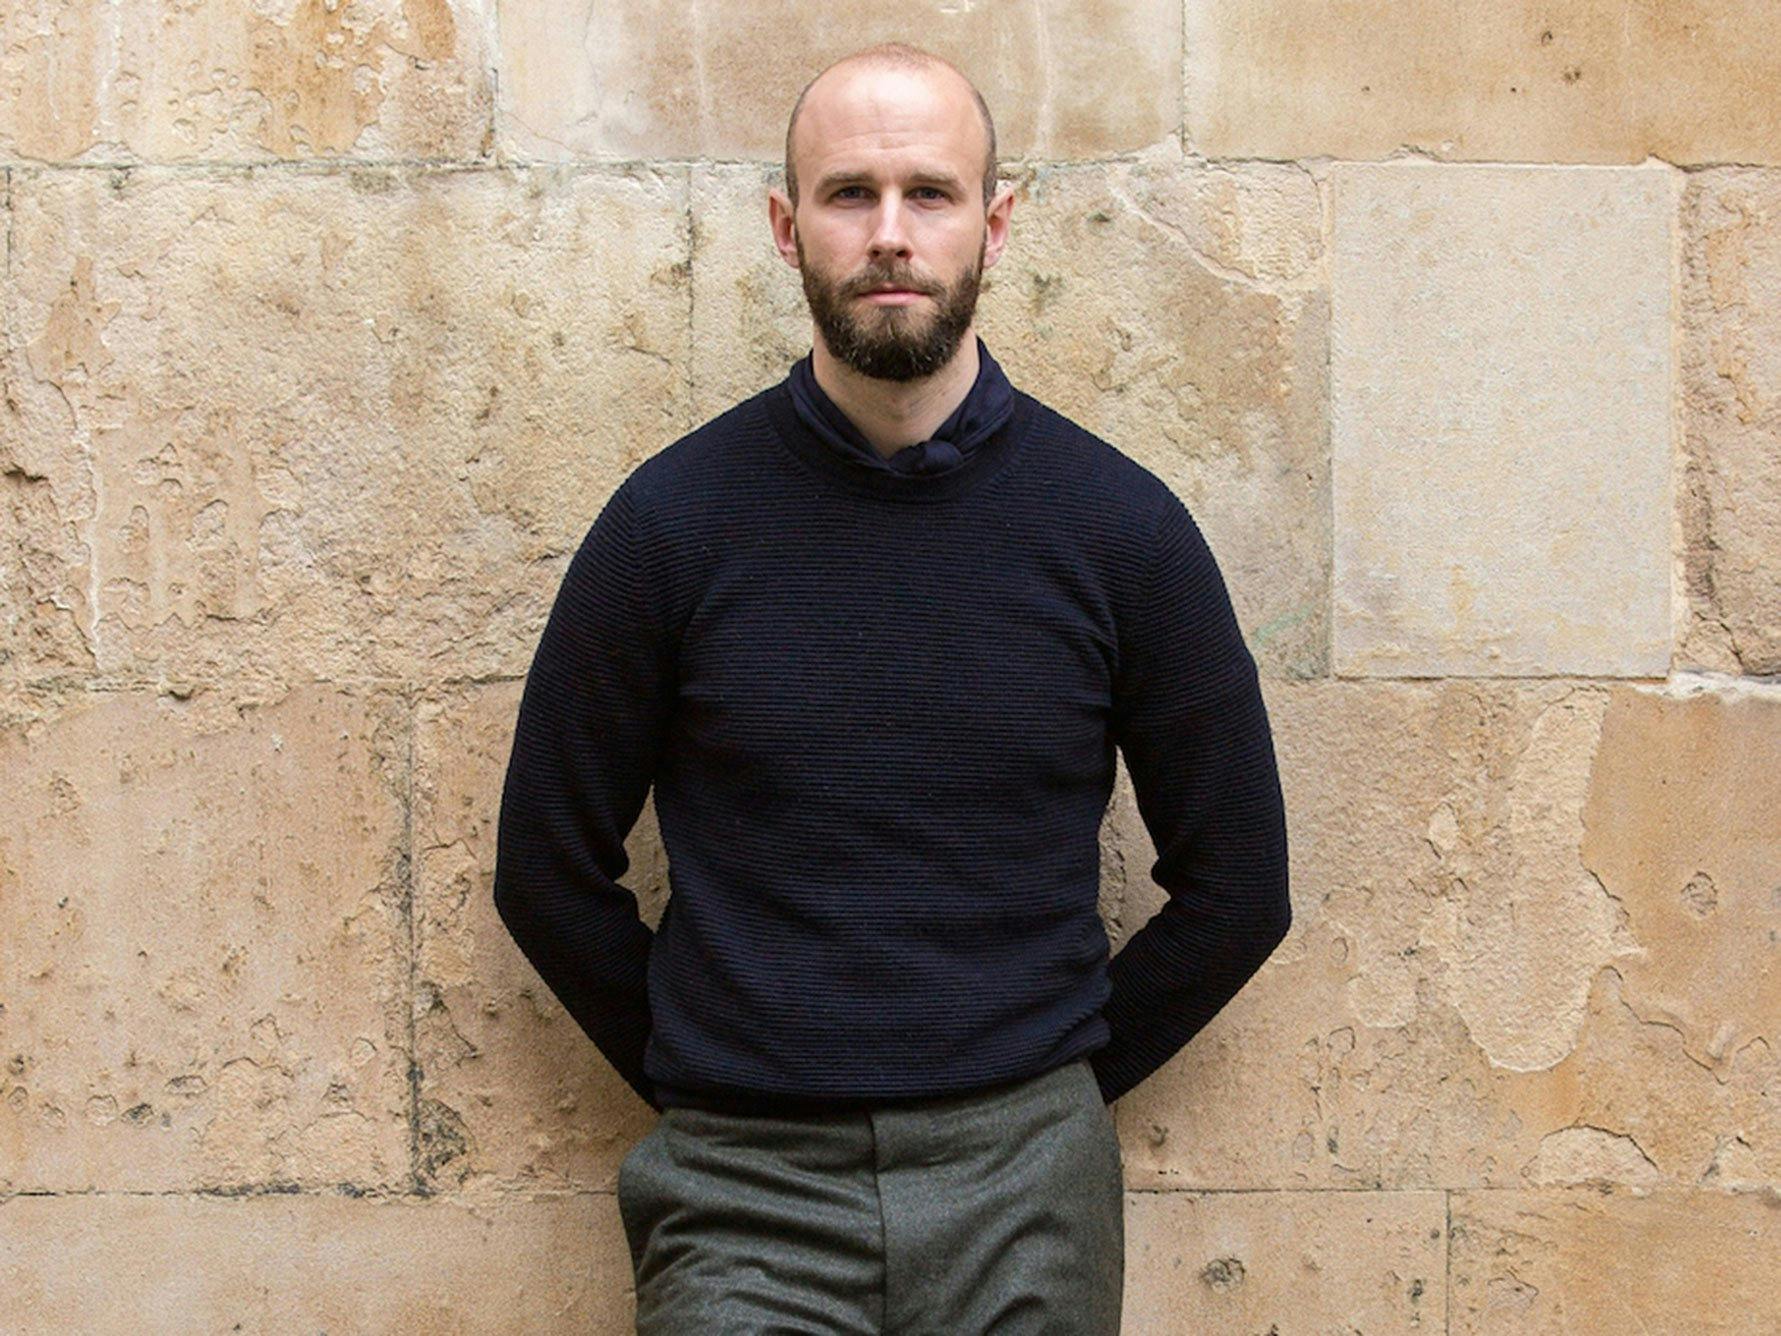 Simon Crompton leans against a brick wall wearing a navy jumper with navy cashmere square neckerchief and grey slacks